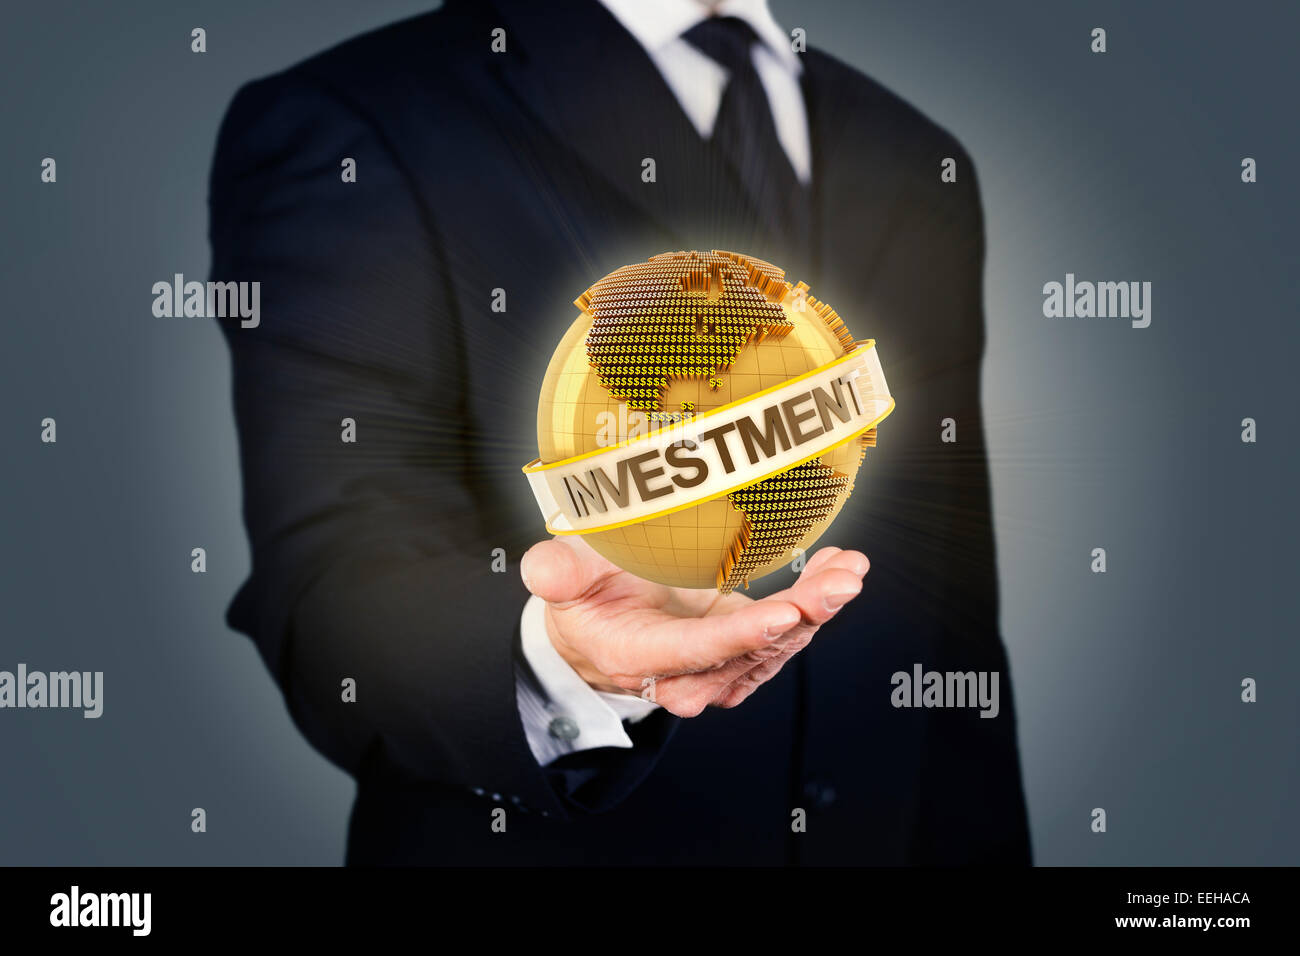 Businessman holding a golden globe with investment text Stock Photo